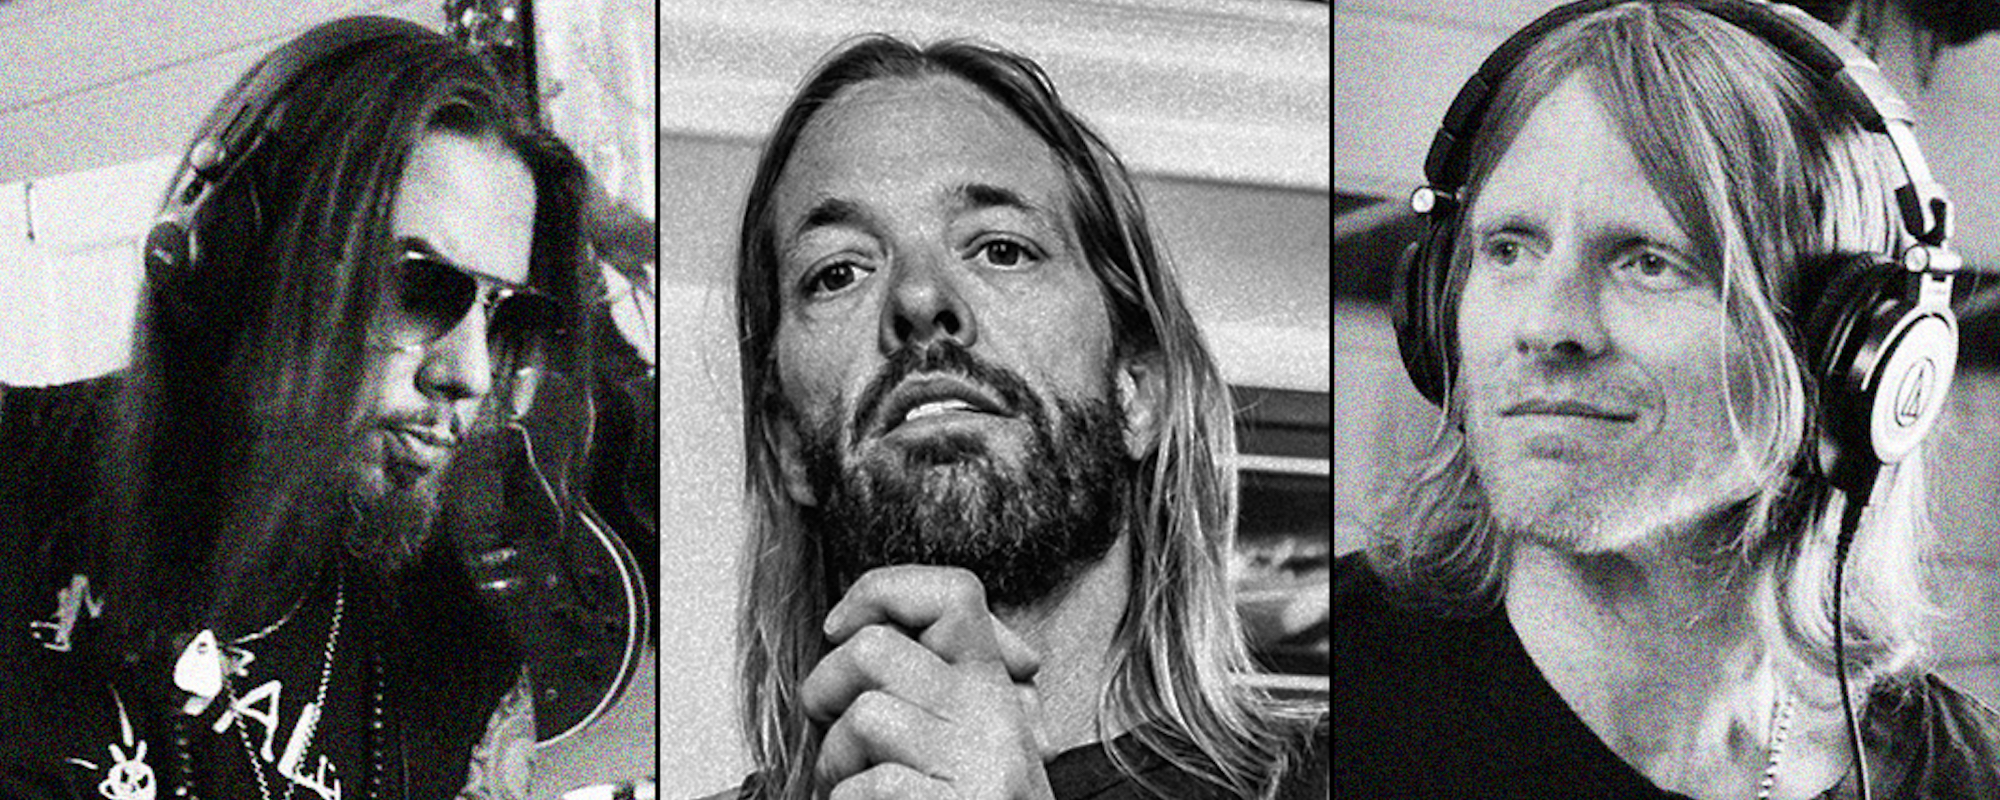 Foo Fighters’ Taylor Hawkins, Jane’s Addiction’s Dave Navarro and Chris Chaney Form Supergroup